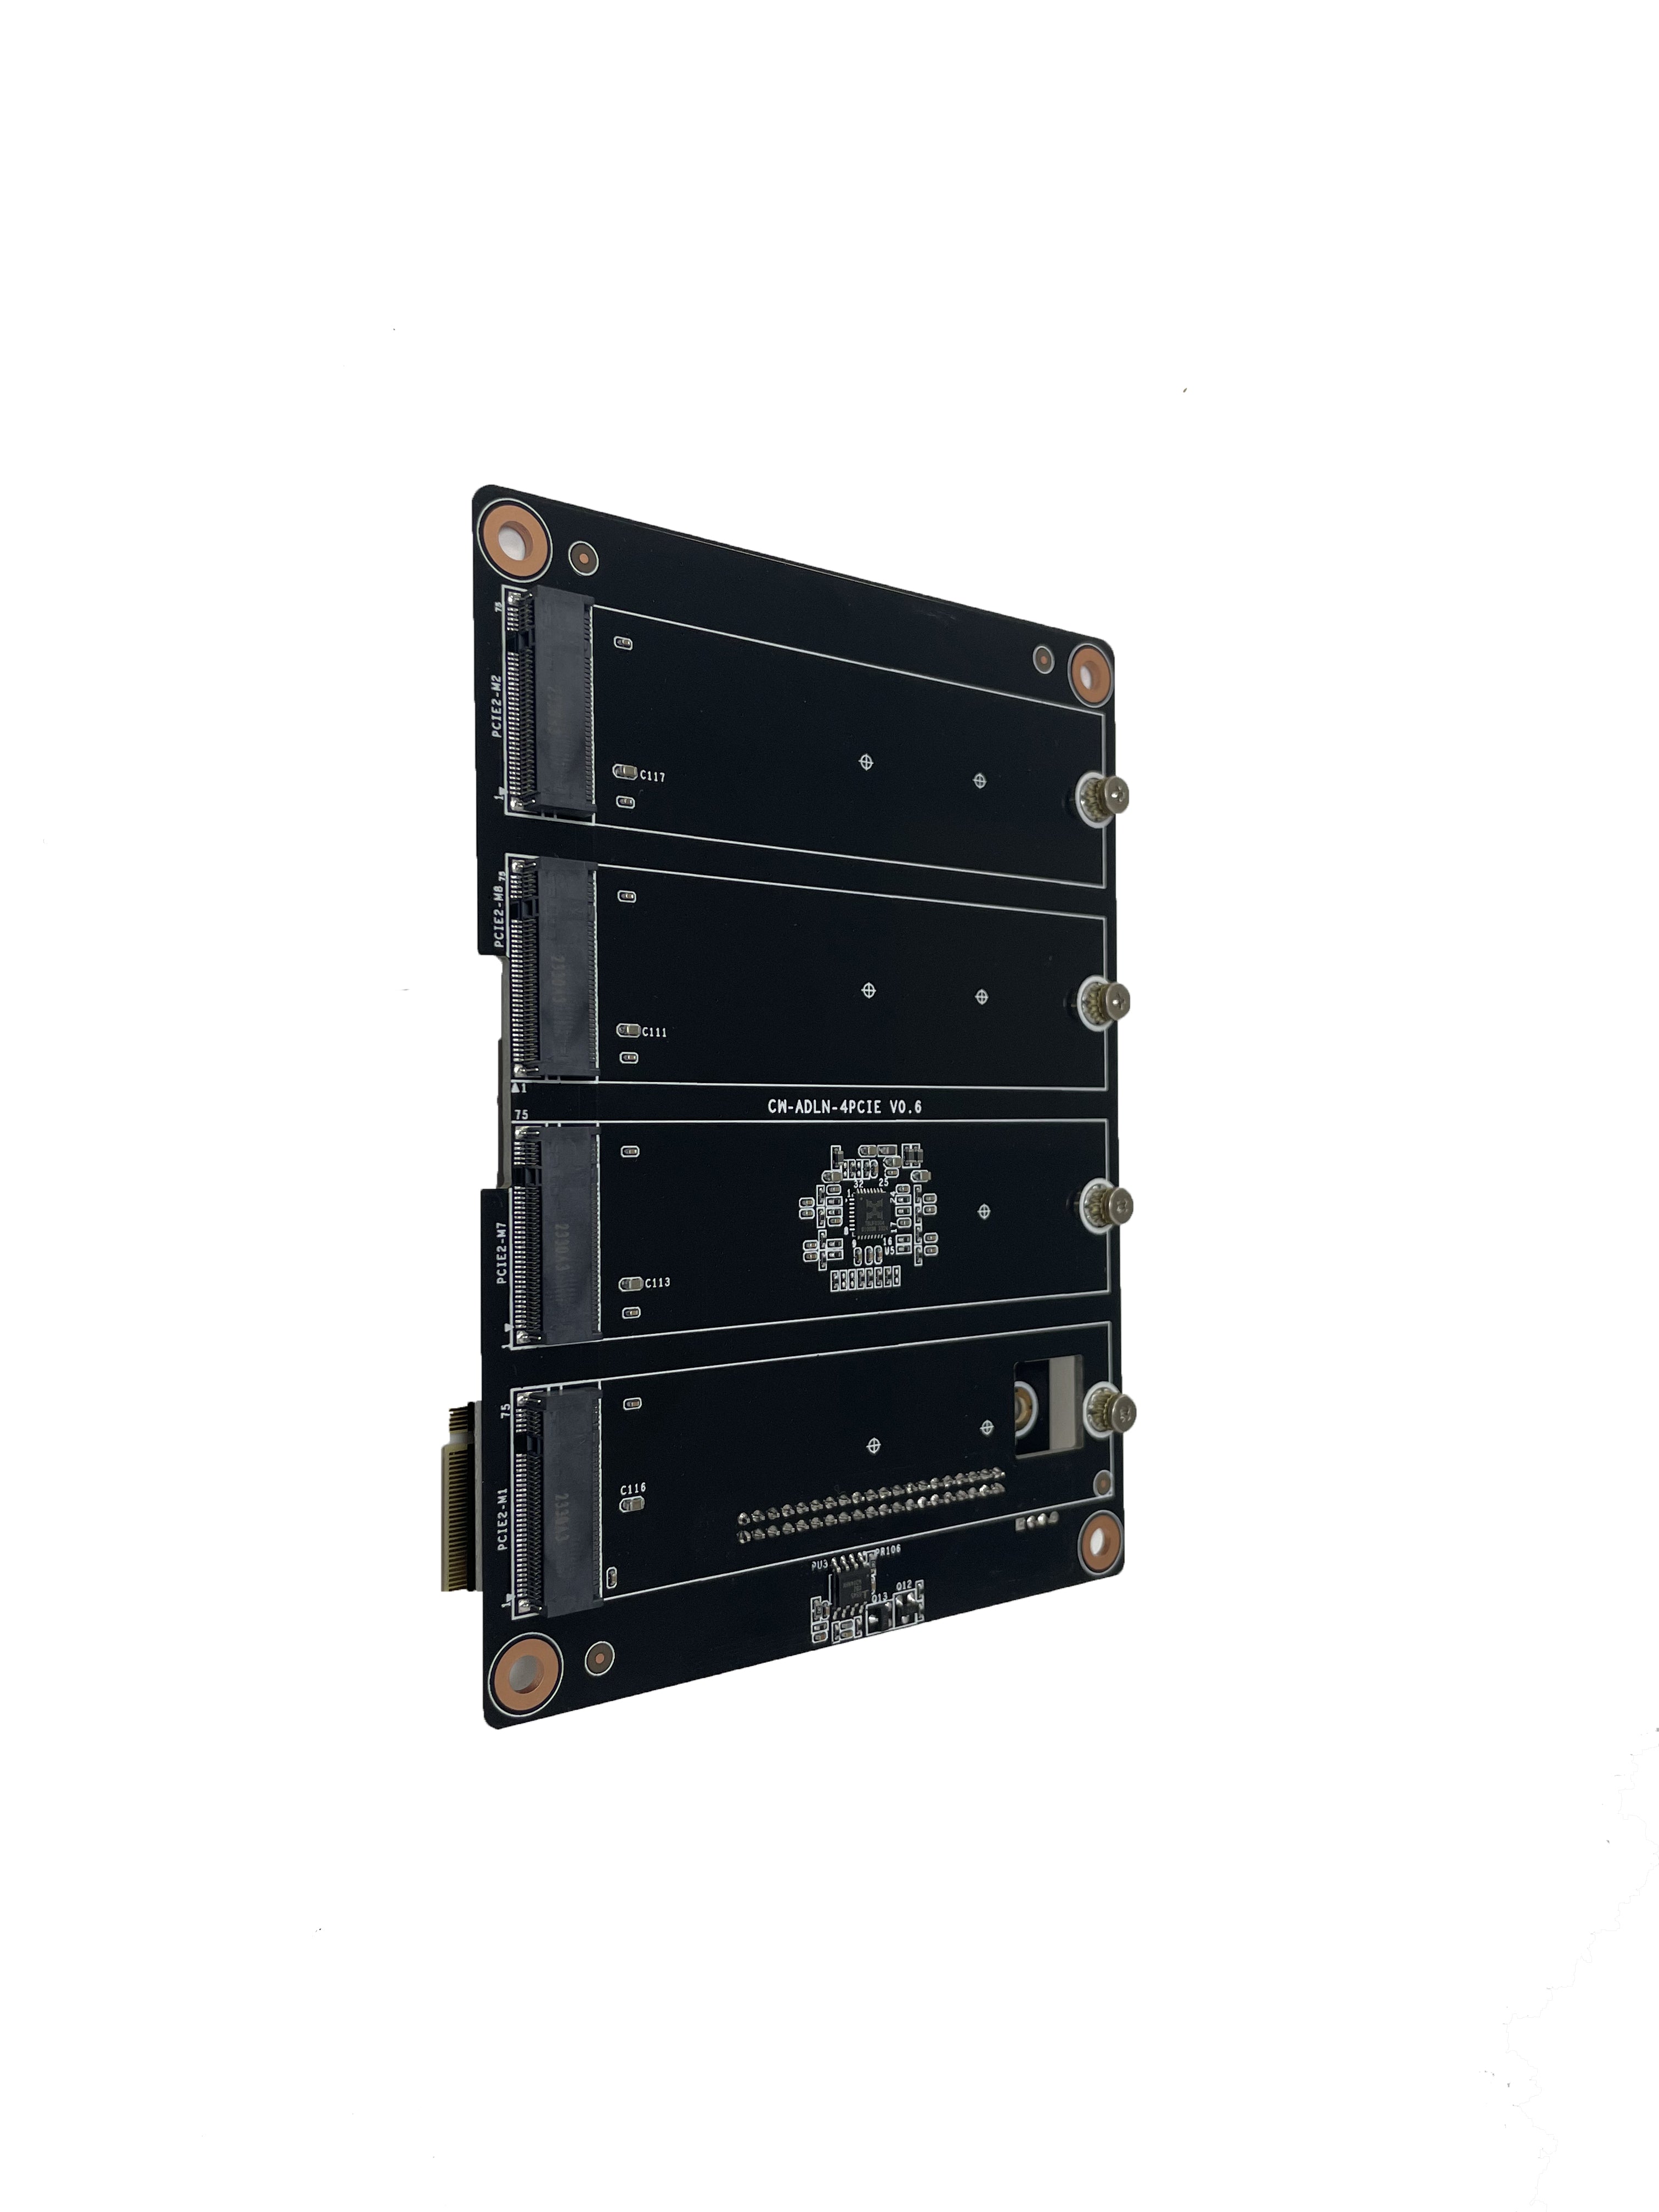 M.2 x4 interface supports expansion of 2/3 M.2 NVMe x1 adapter boards. Dedicated to special machines, only supports CWWK 4 network port N series products